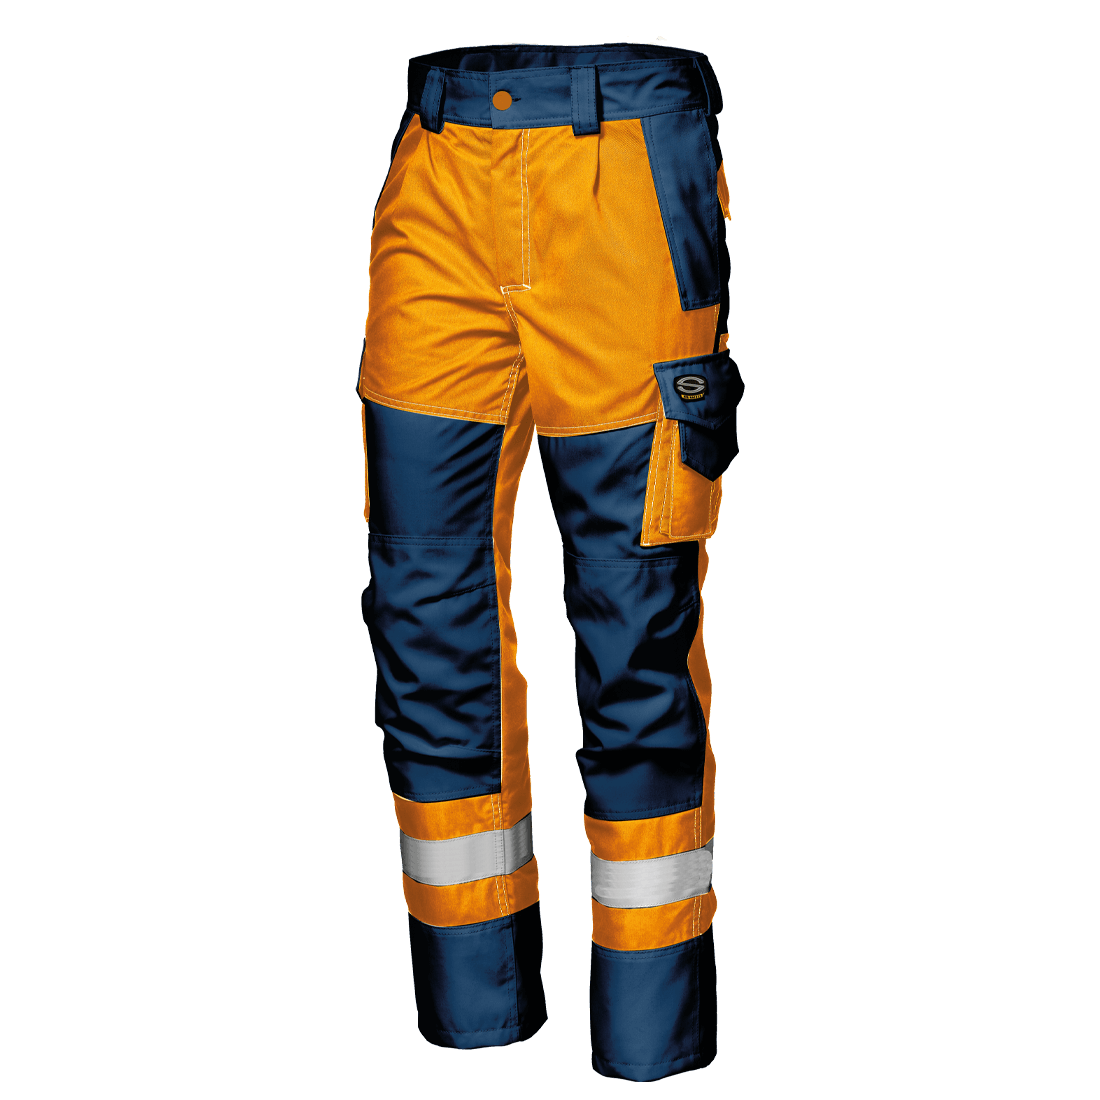 Top Quality Workwear Trouser Manufactured By The X Athletic Wear.